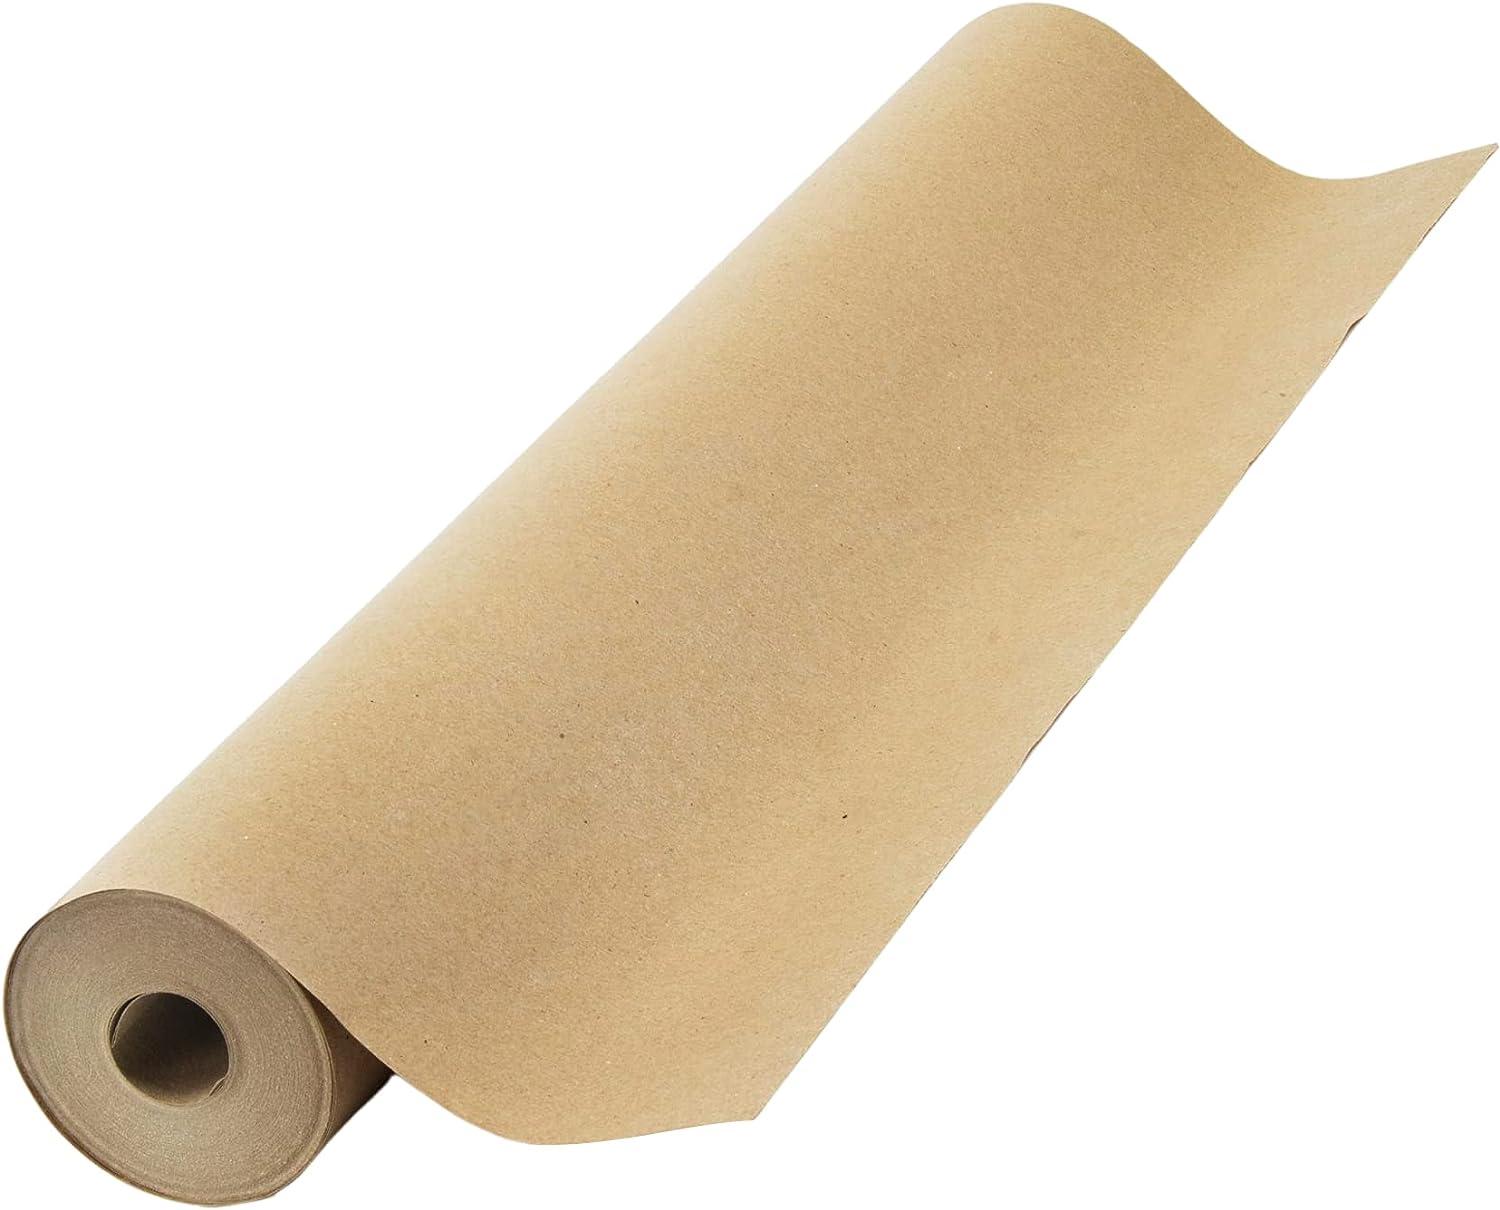  RUSPEPA Brown Kraft Paper Roll - 48 inches x 100 feet -  Recyclable Paper Perfect for Wrapping, Craft, Packing, Floor Covering,  Dunnage, Parcel, Table Runner : Health & Household